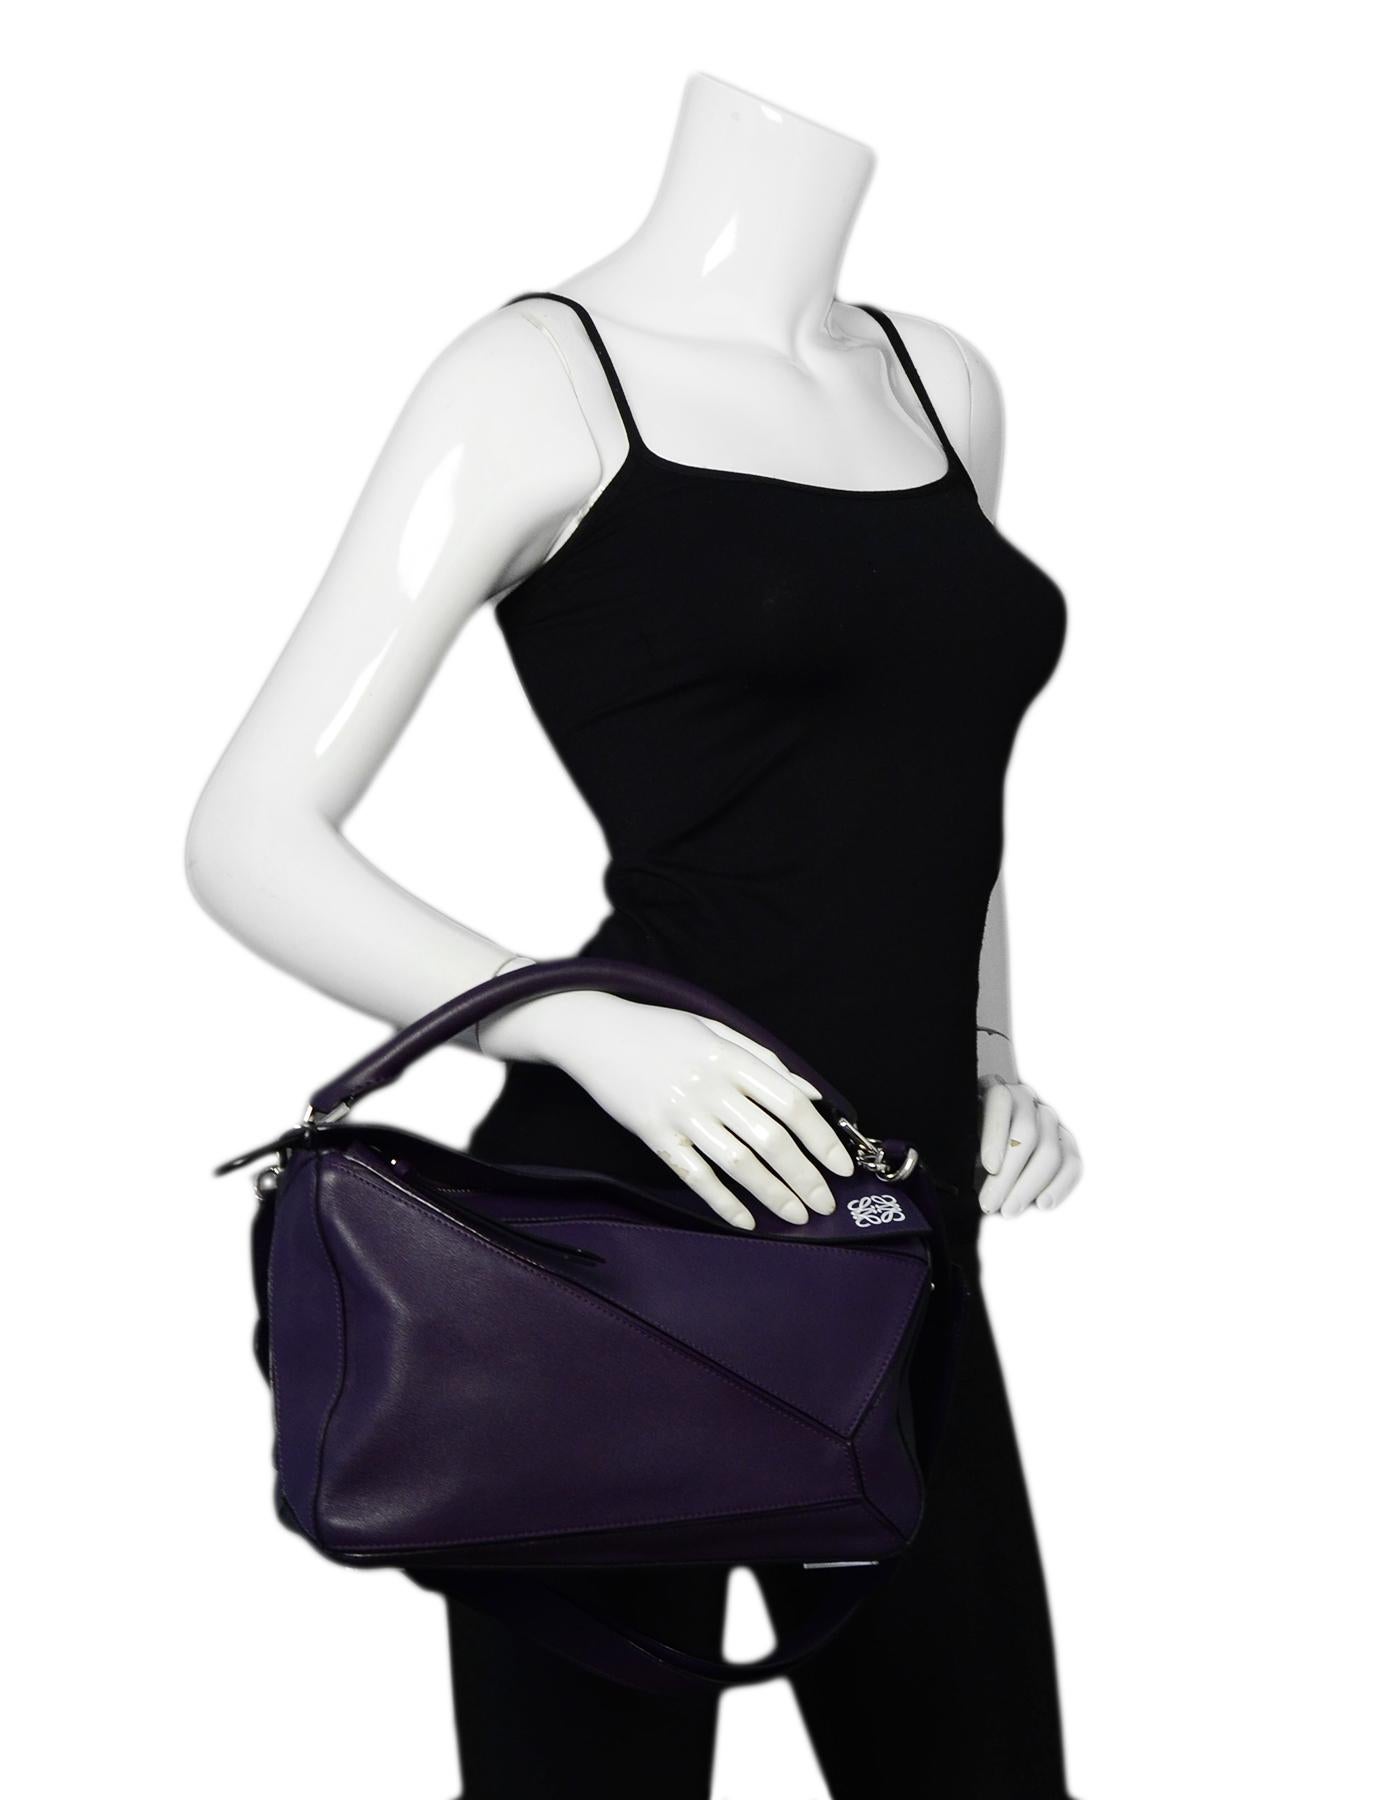 Loewe Purple Calfskin Leather Medium Puzzle Shoulder Bag w/ Crossbody Strap

Made In: Spain
Color: Purple
Hardware: Silvertone hardware
Materials: Calfskin leather
Lining: Beige textile lining
Closure/Opening: Top flap with zip closure
Exterior